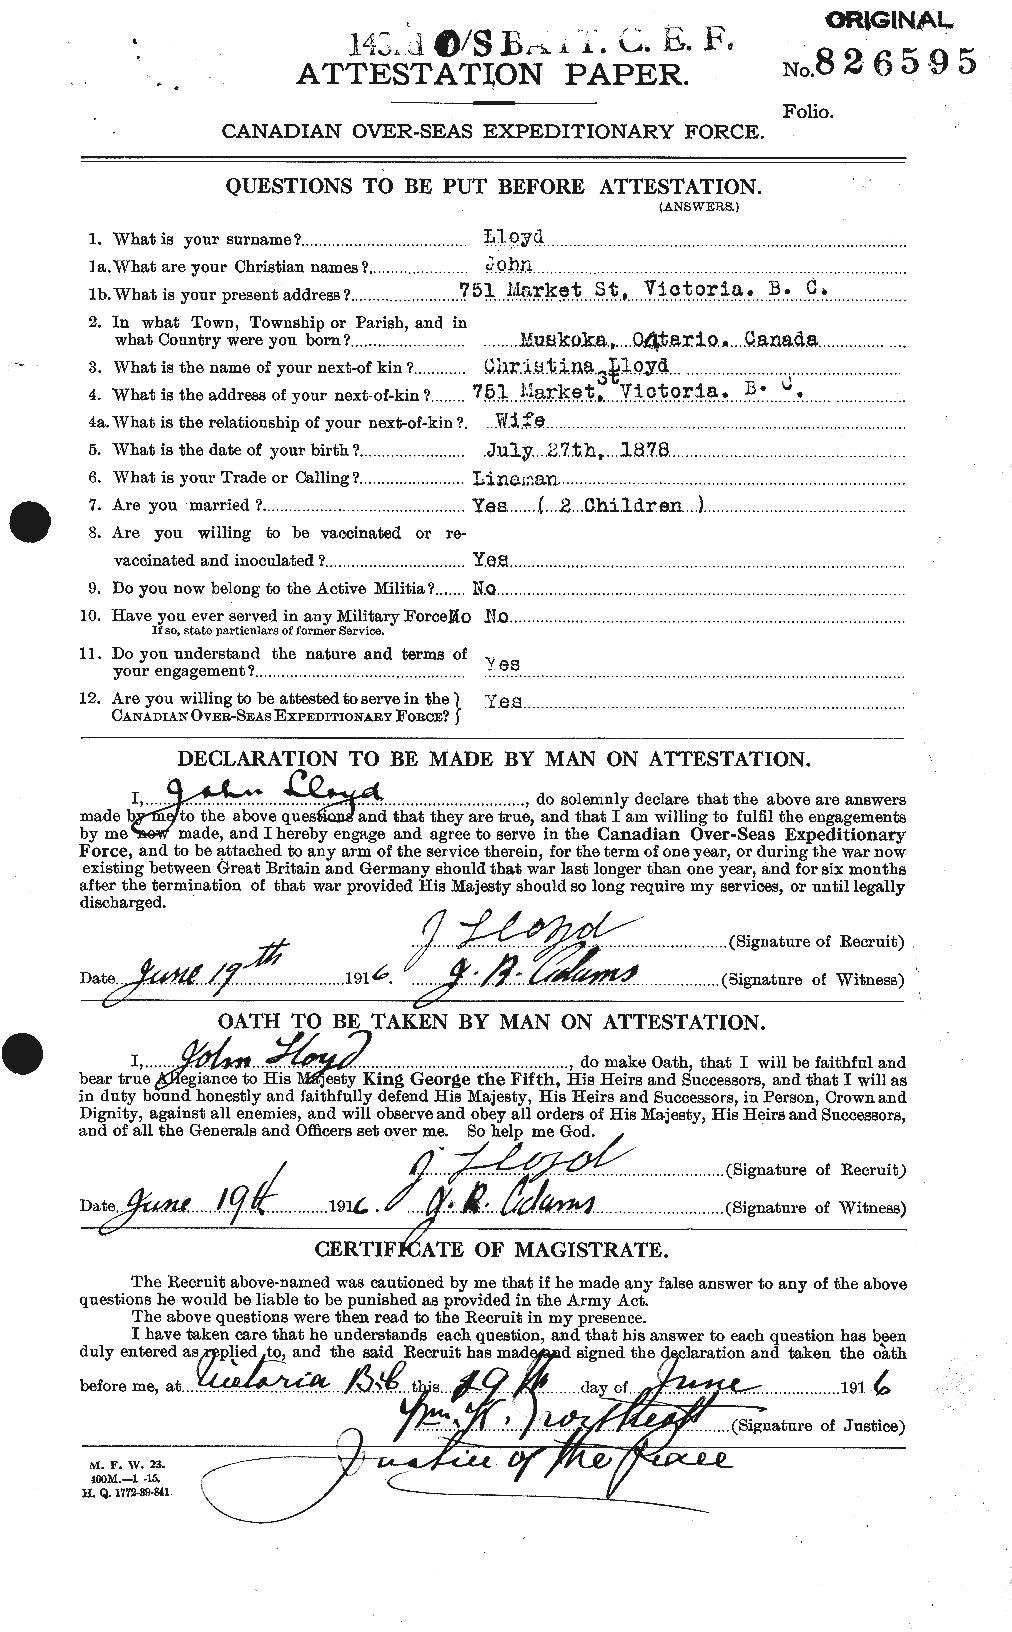 Personnel Records of the First World War - CEF 469161a